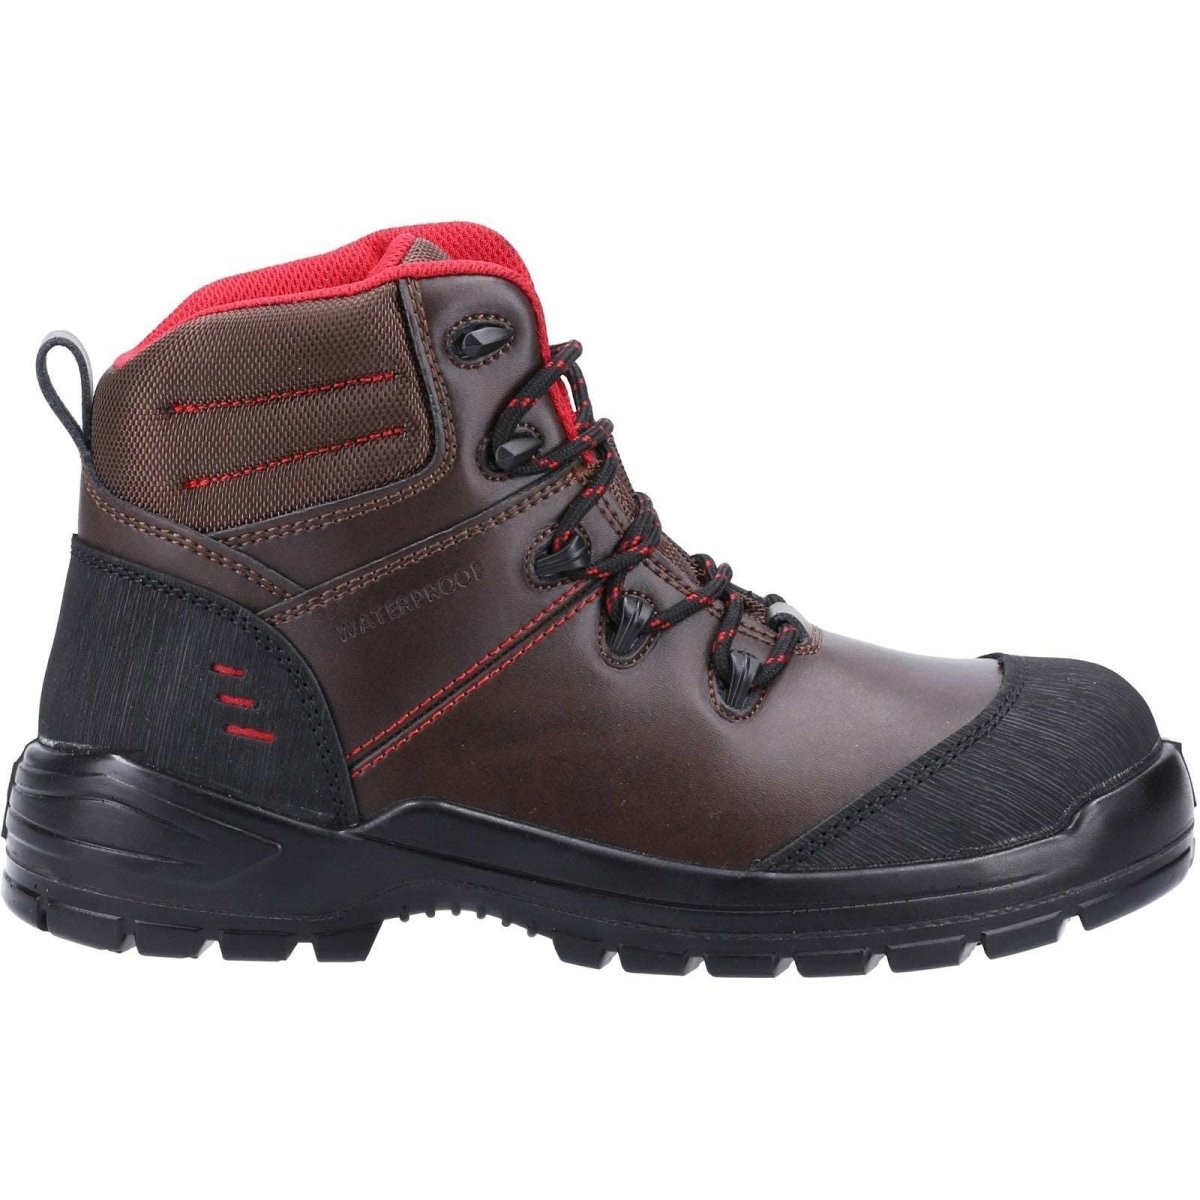 Amblers AS308C Waterproof Composite Toe Cap Safety Hiker Boots - Shoe Store Direct